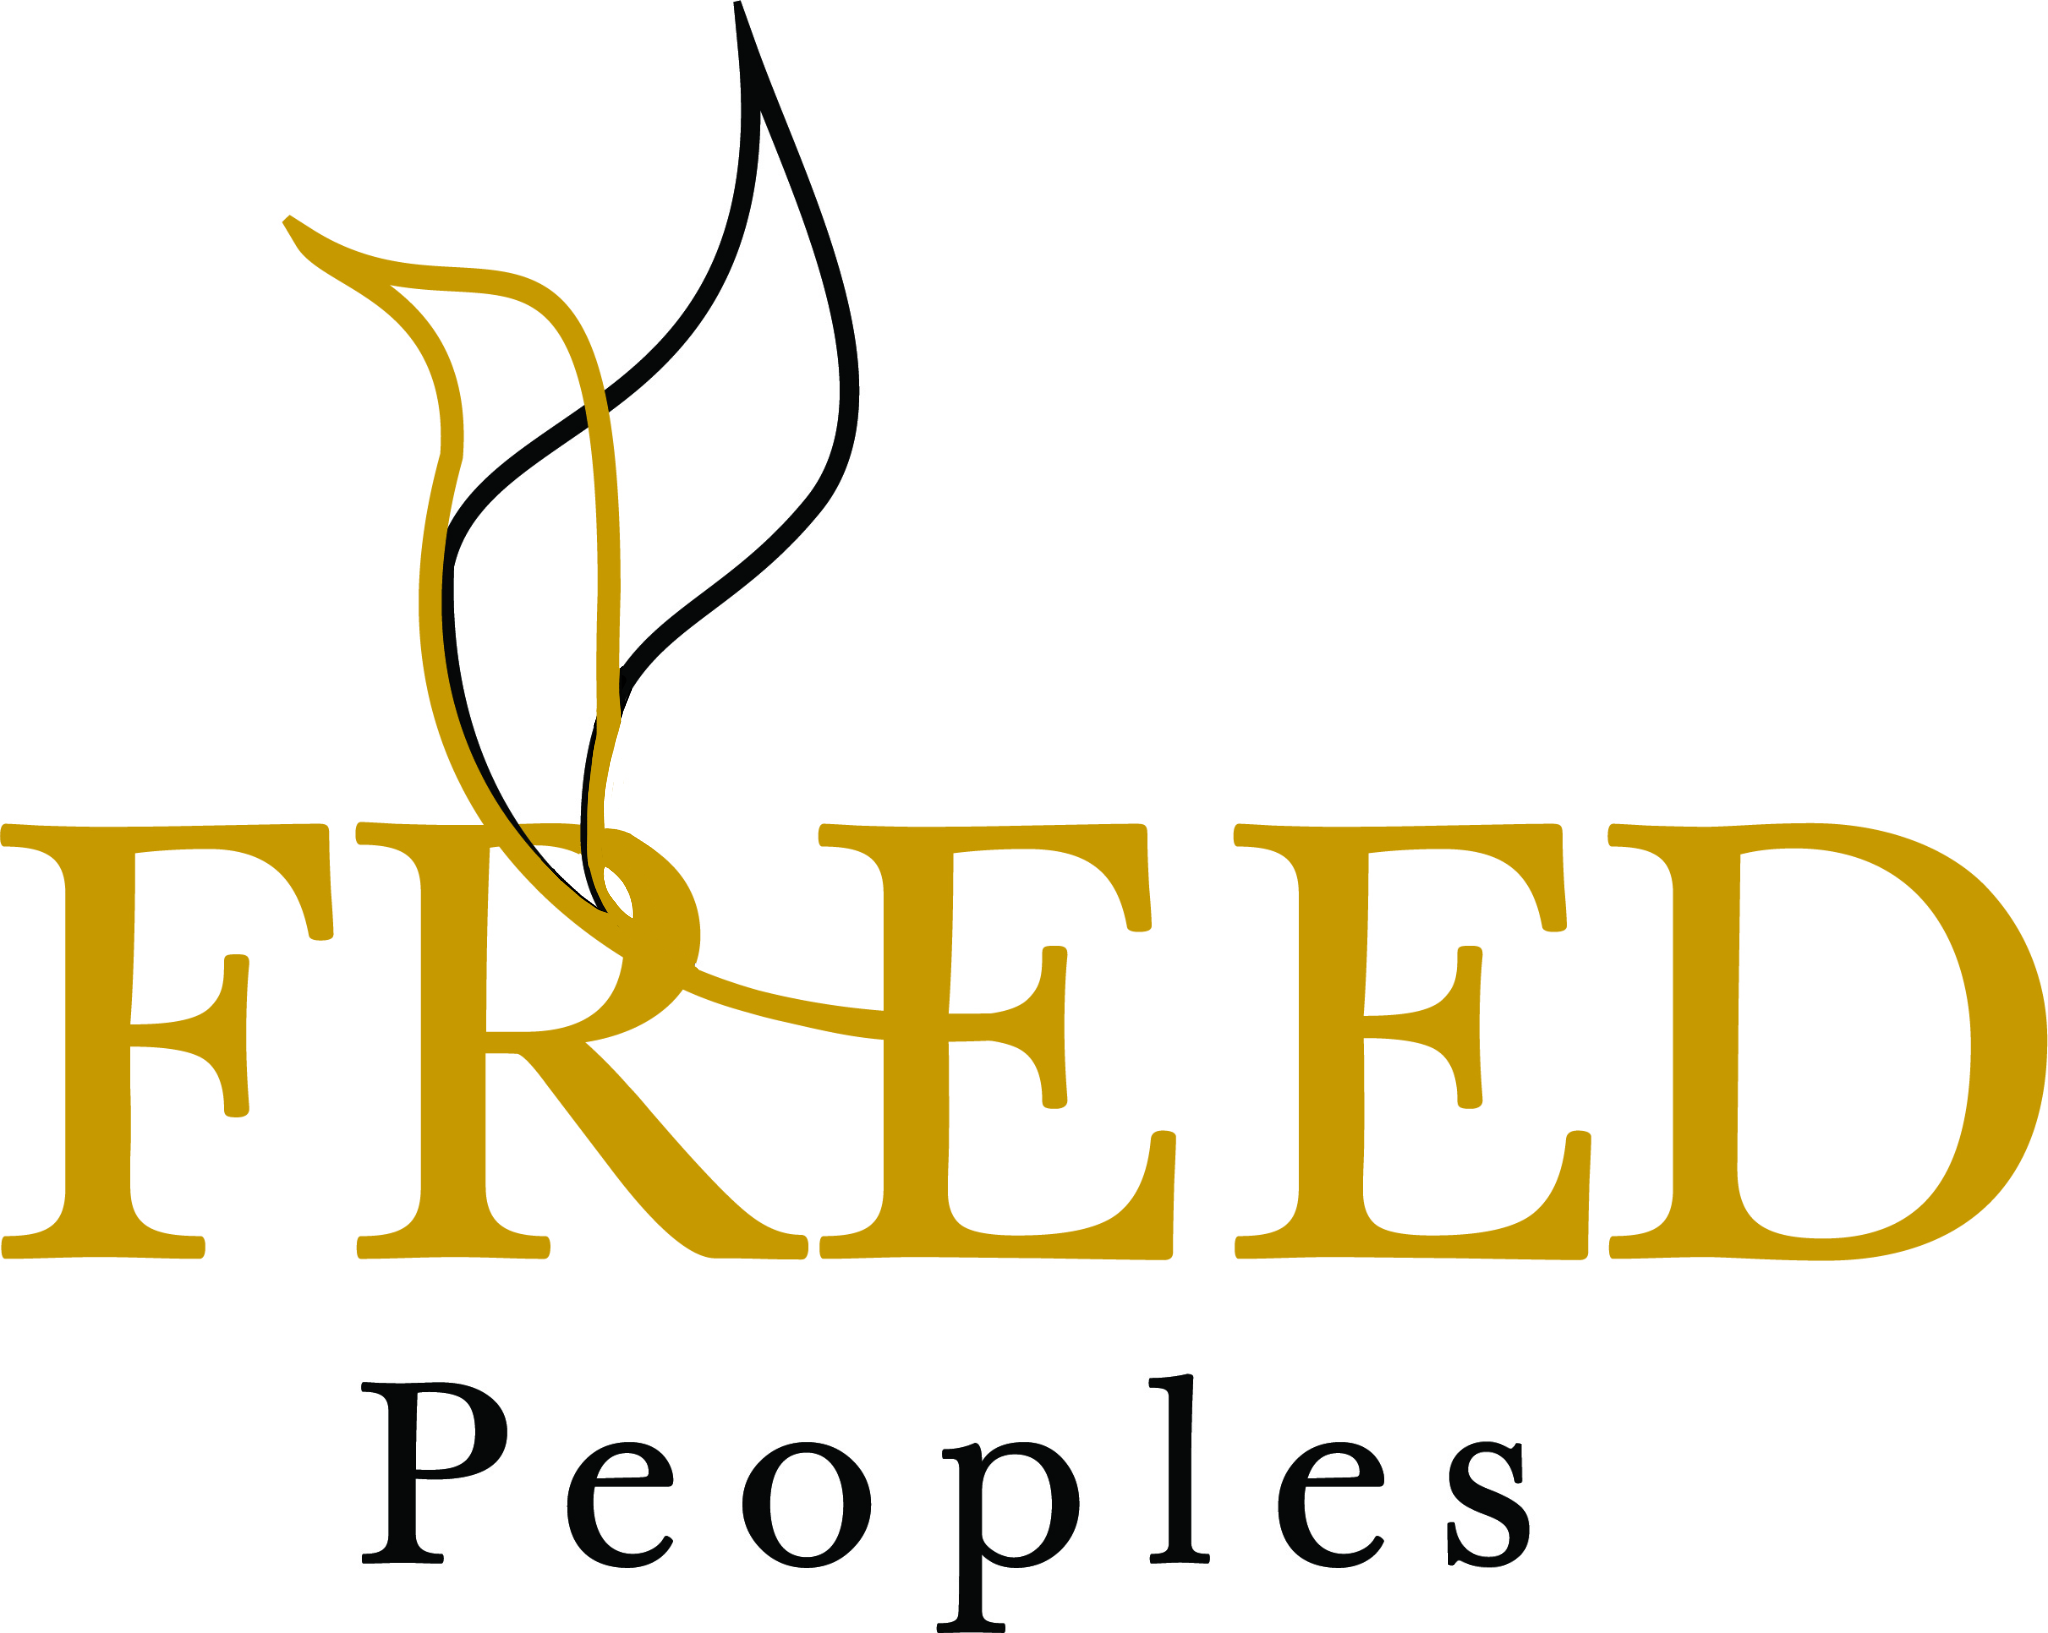 The FREED Peoples logo